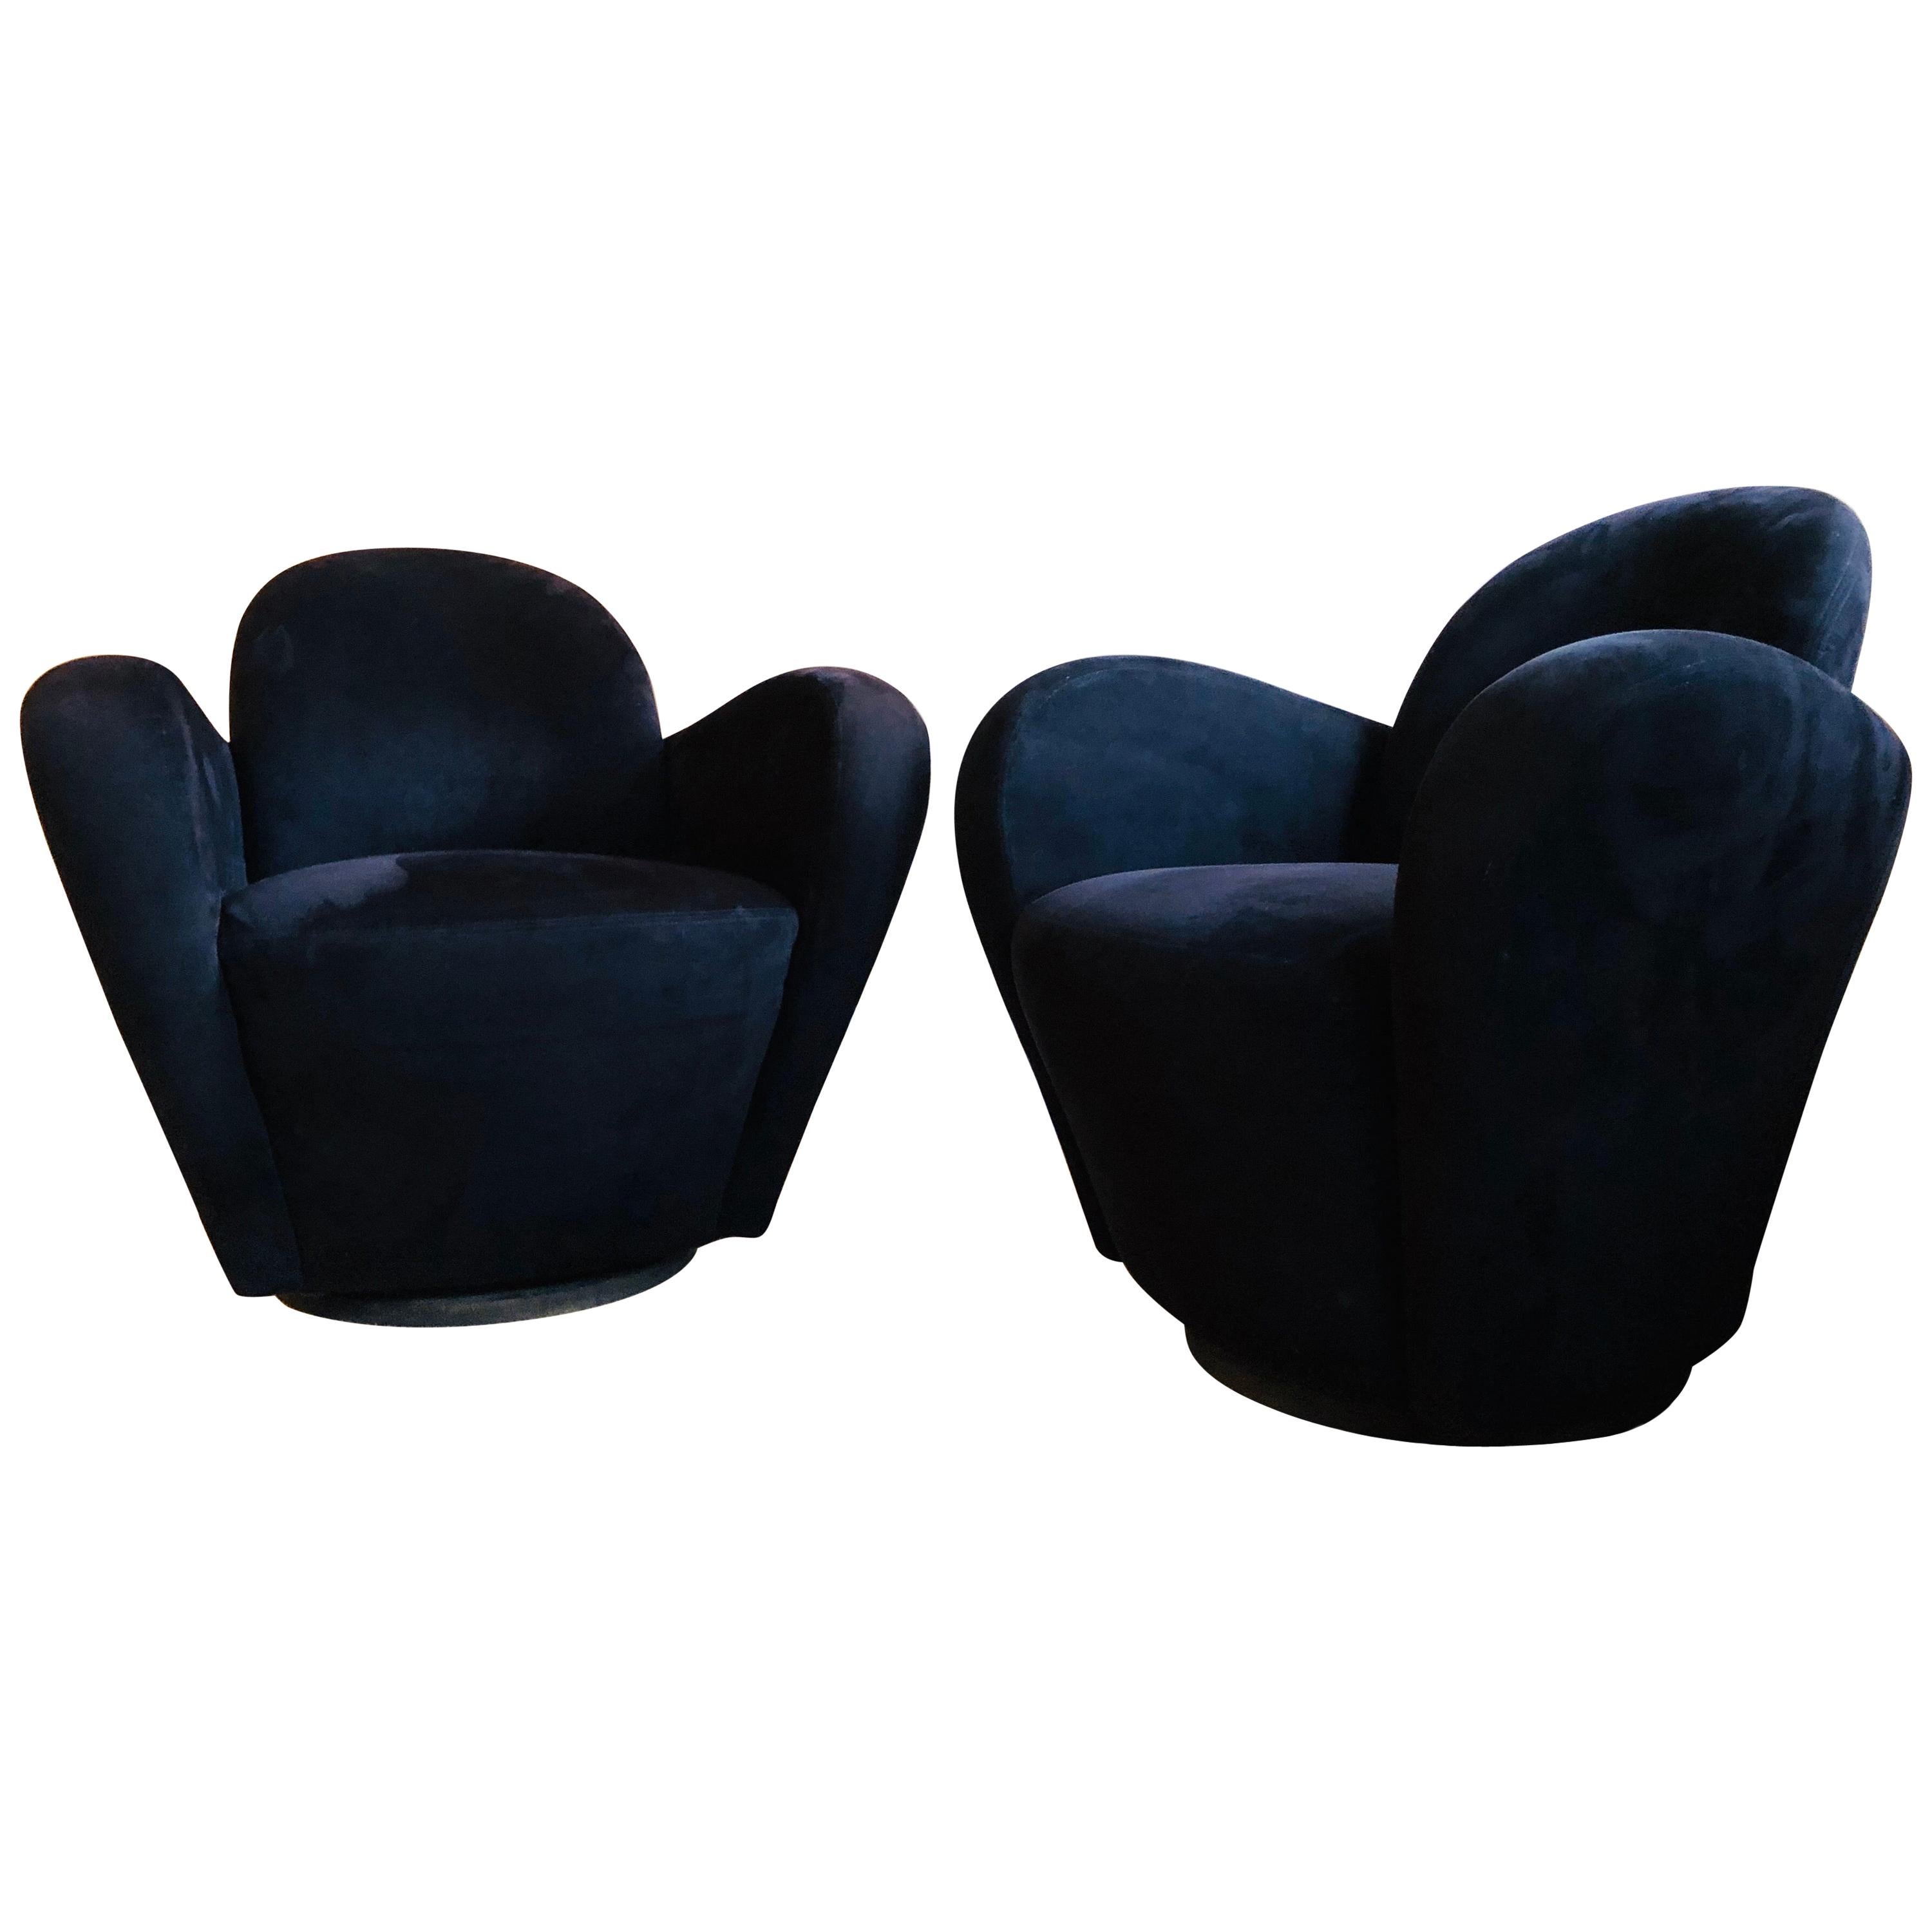 Black Suede Swivel Chairs by Vladimir Kagan for Directional